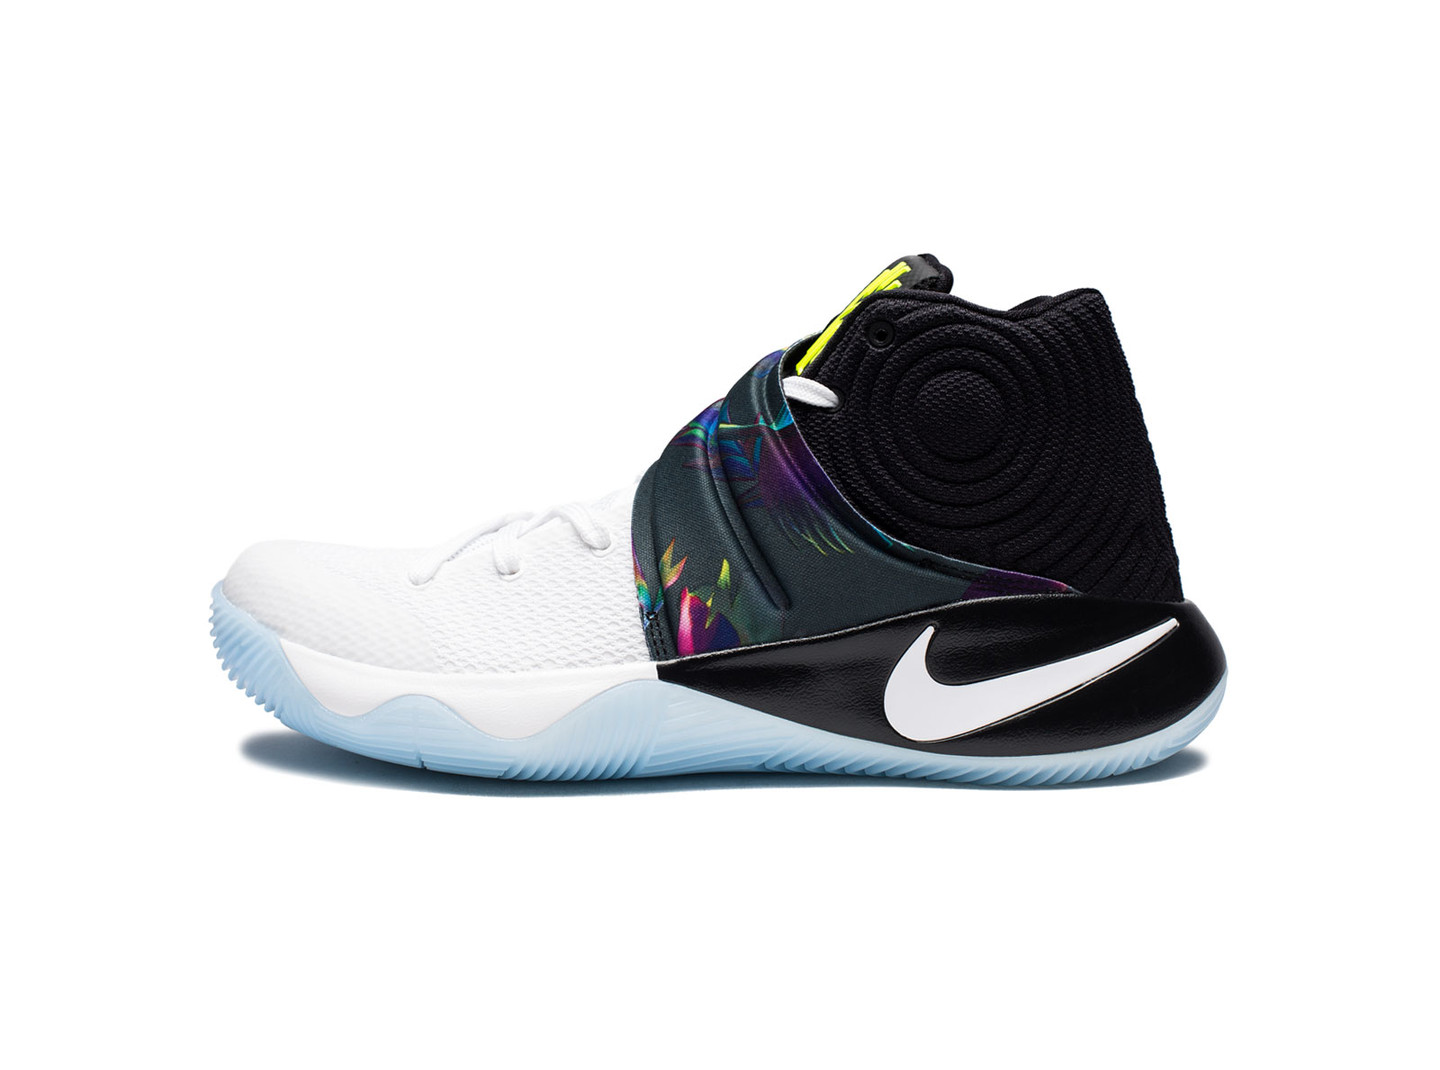 Parade' Colorway of the Nike Kyrie 2 